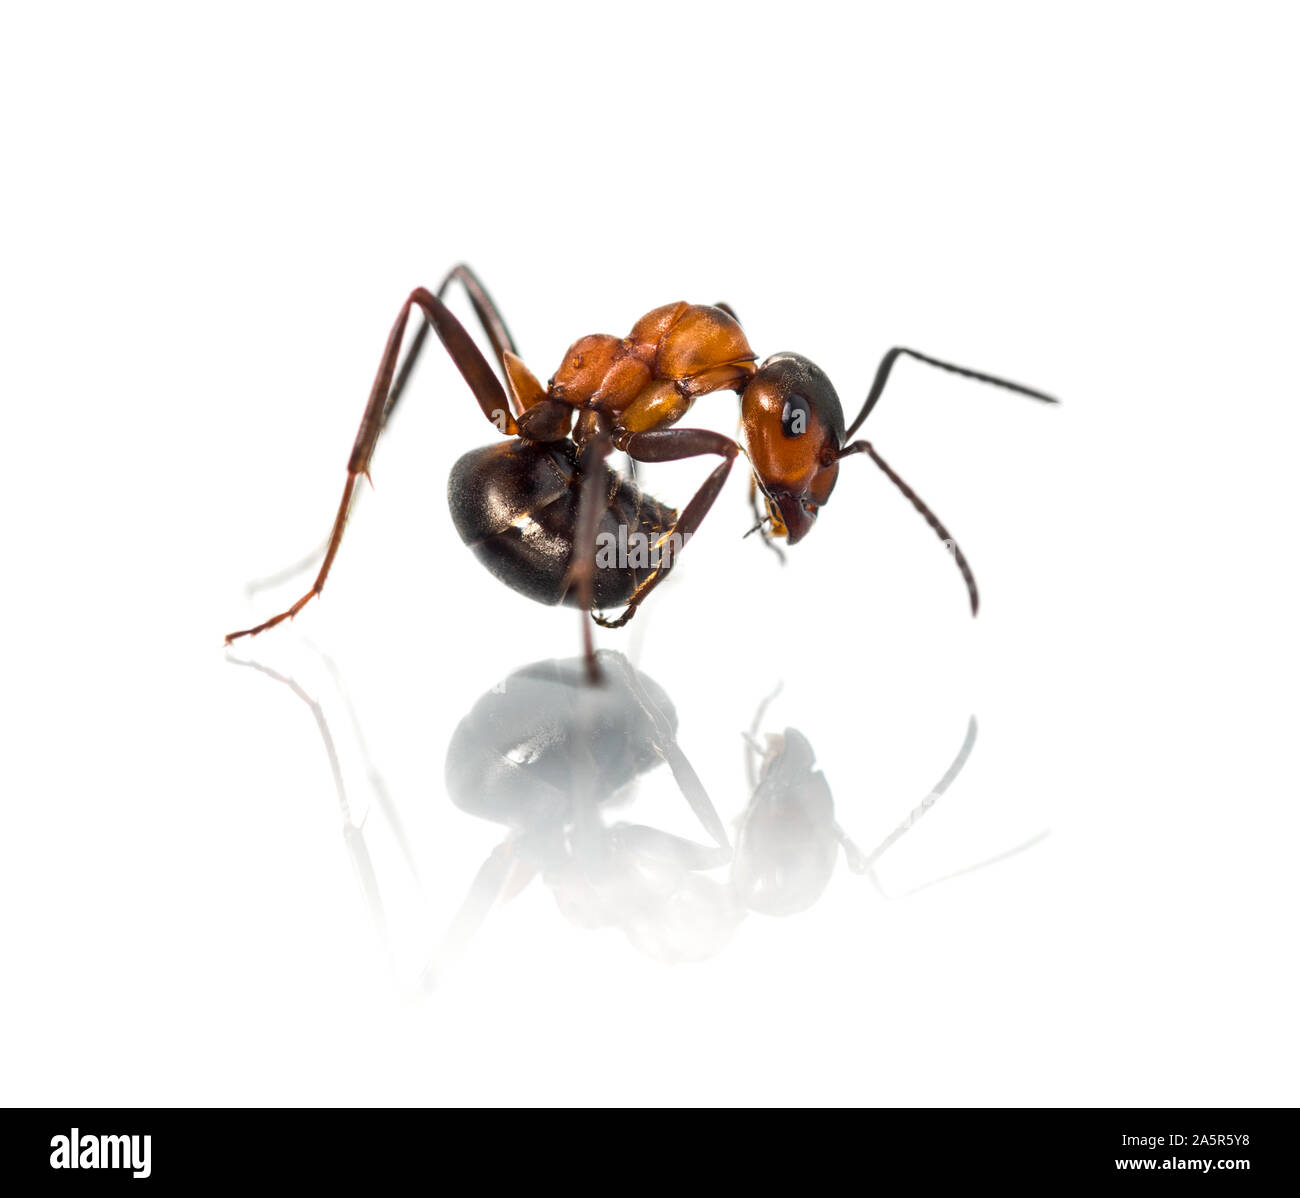 European red wood ant, Formica polyctena, against white background Stock Photo